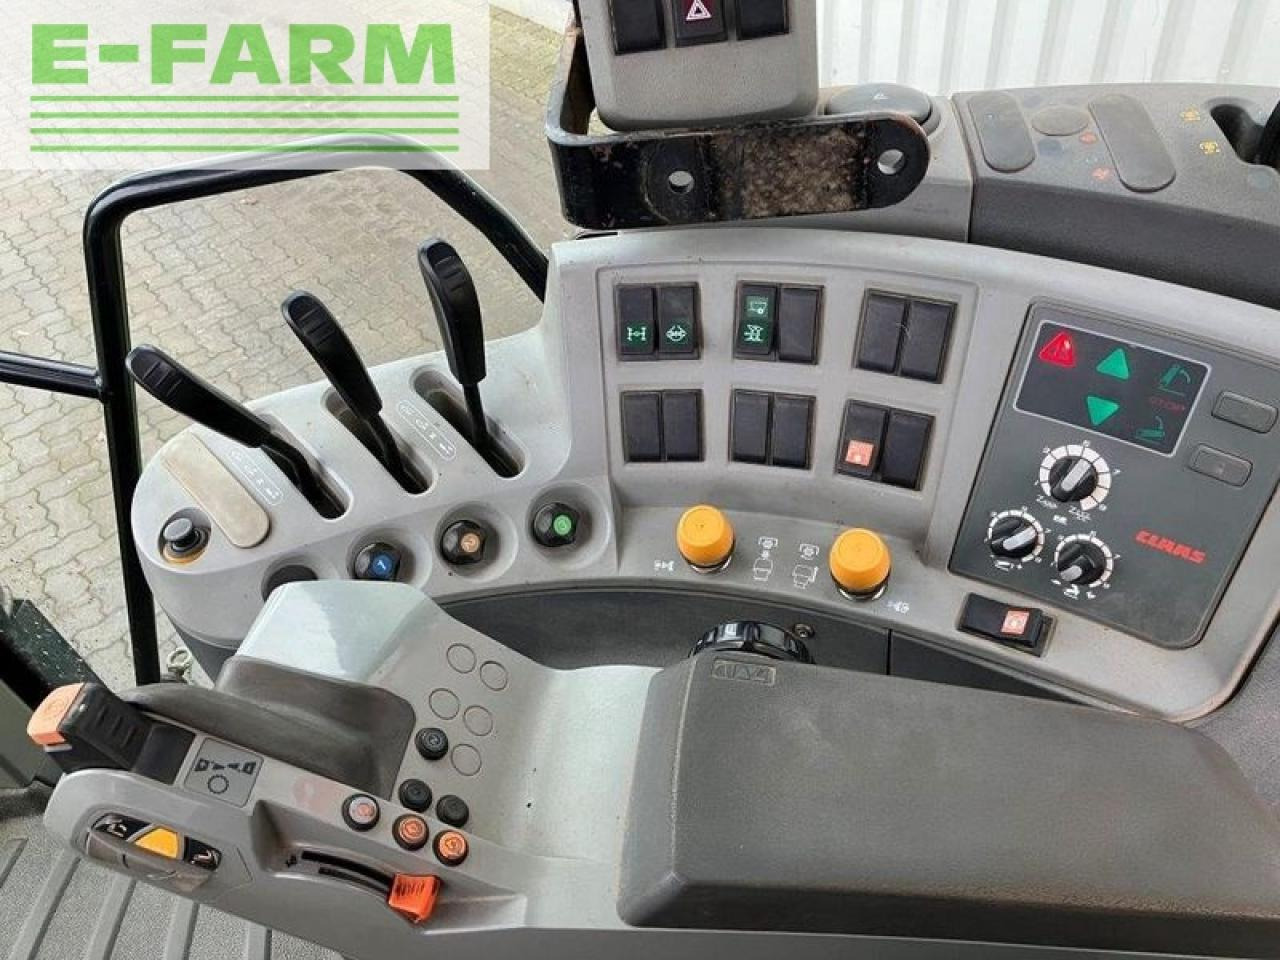 Tractor CLAAS arion 640 cis